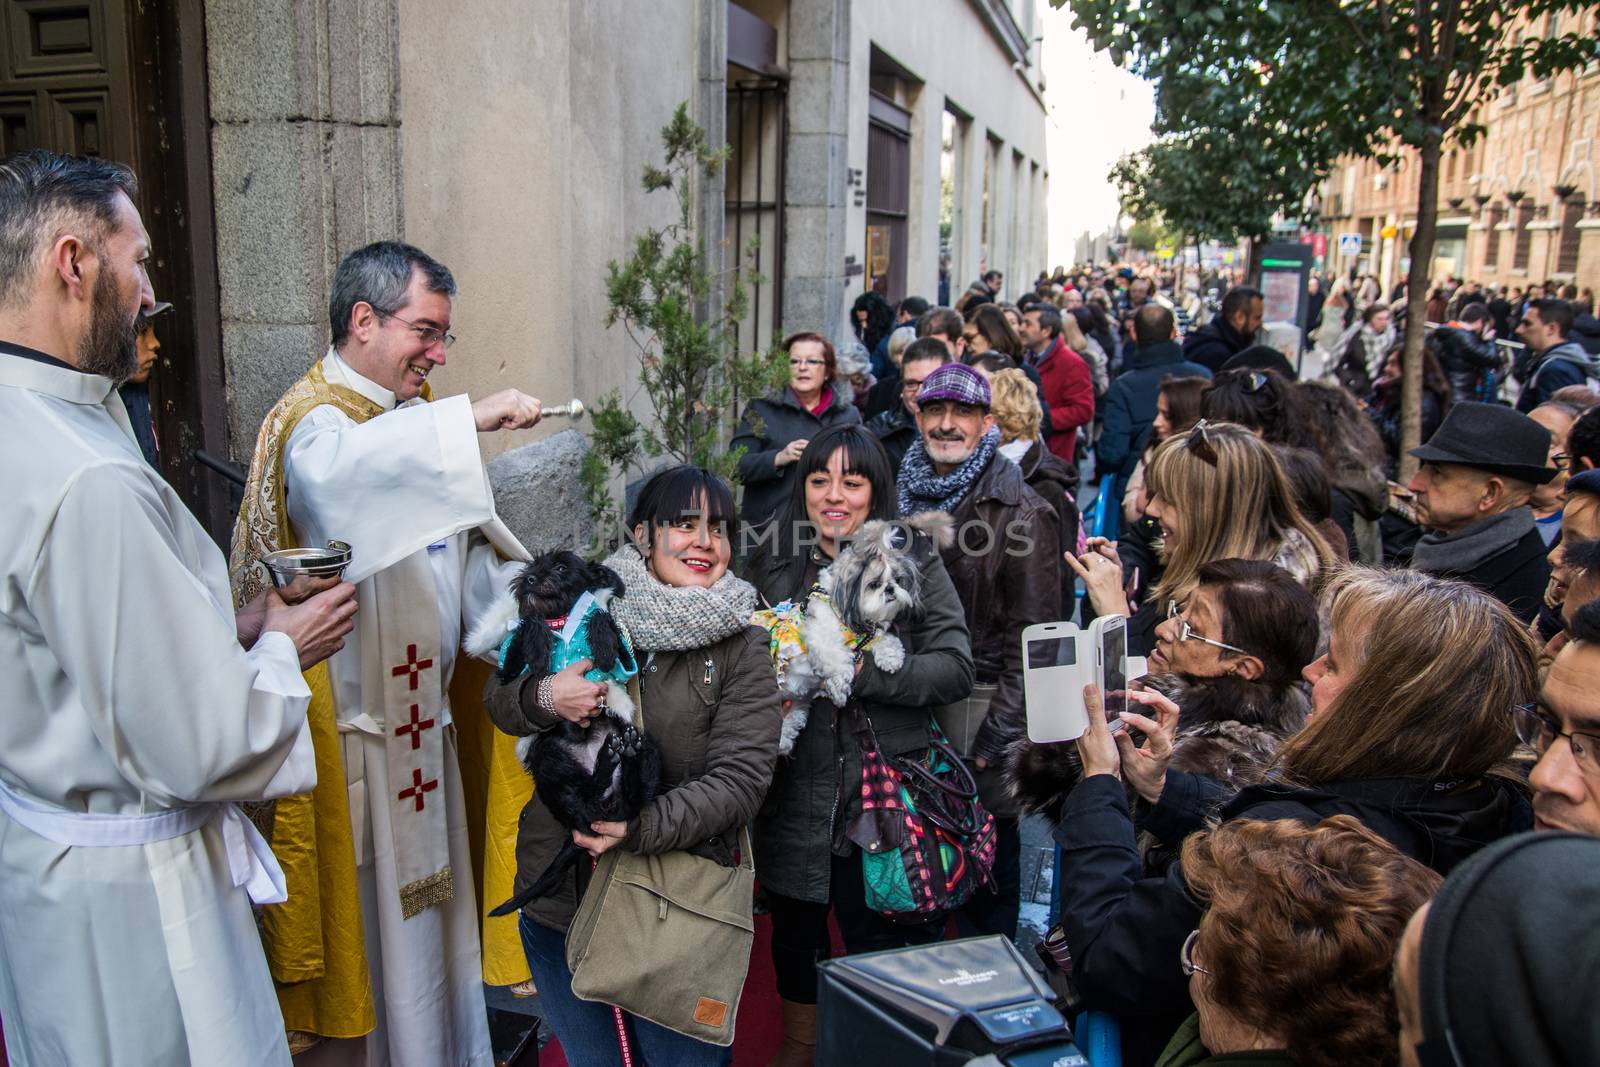 SPAIN, Madrid: Men and women wait in line, holding their pets to be blessed by a priest outside the church of San Antón in Calle de Hortaleza in Madrid on Saint Anthony's day, the patron saint of animals, on January 17, 2016.